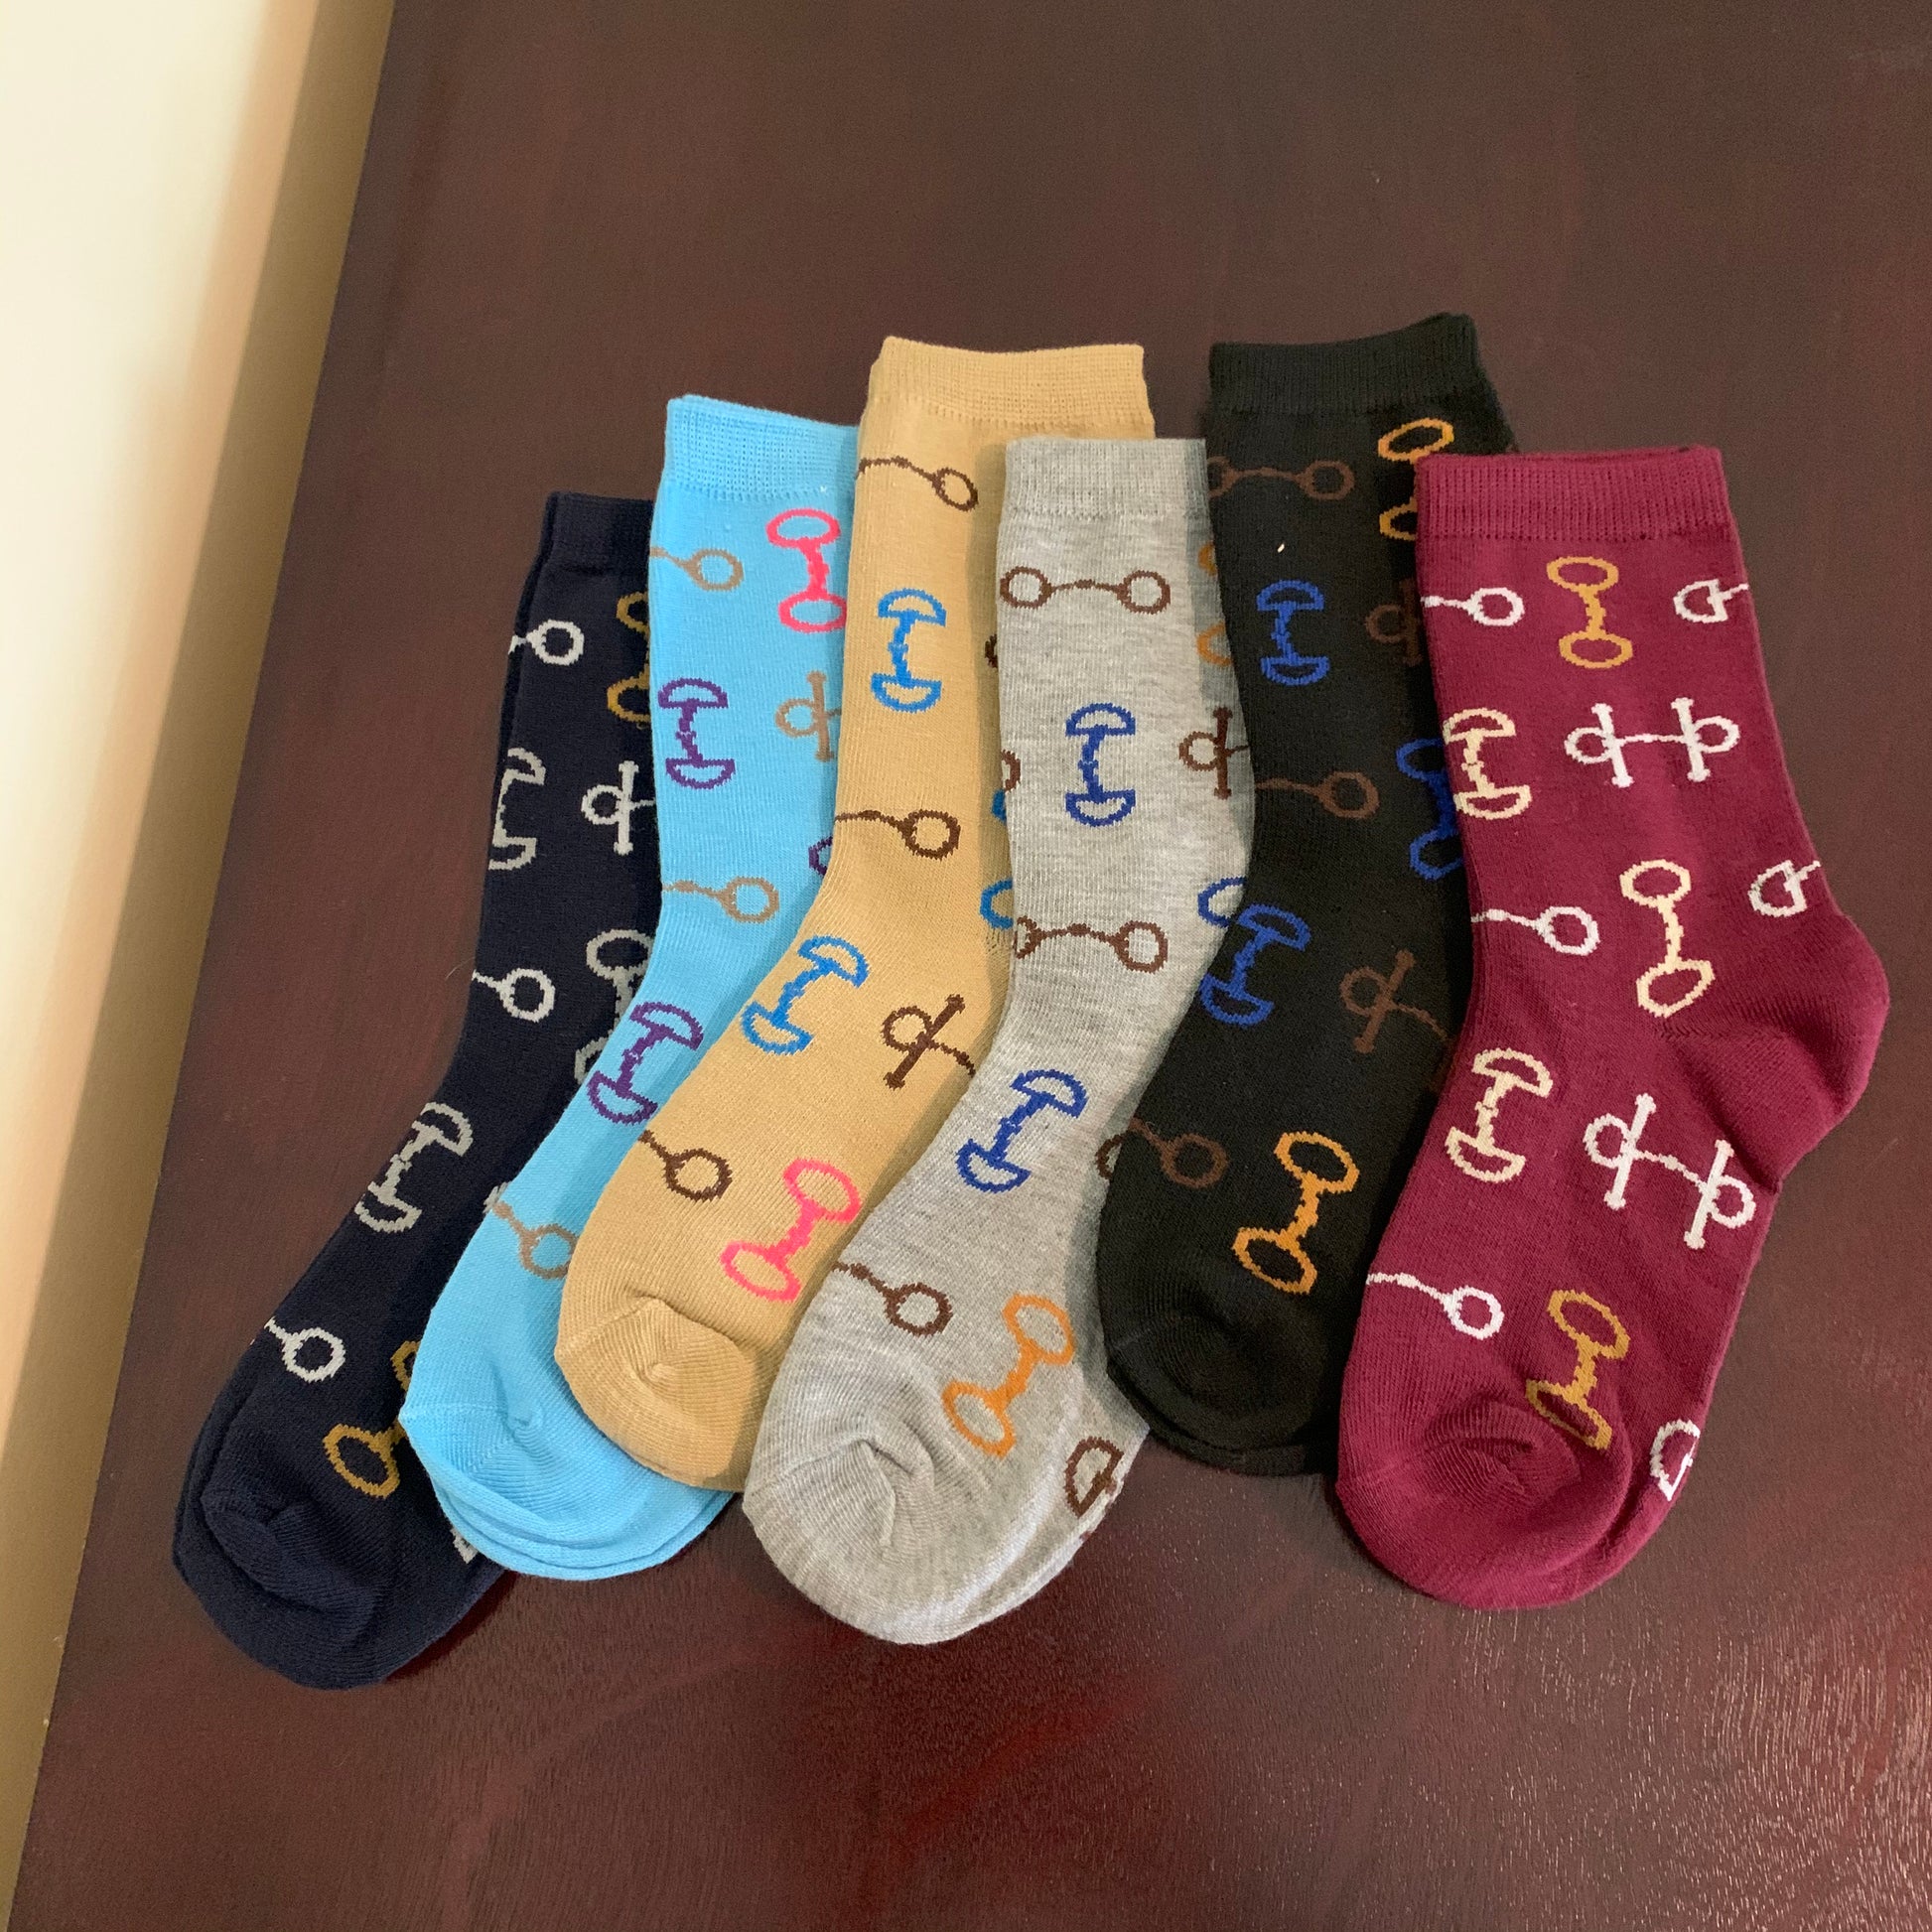 Socks in Maroon Black Grey Tan Aqua and Navy Laying Flat with Multi-Color Snaffle Bits in White Brown Gold Blue and Pink